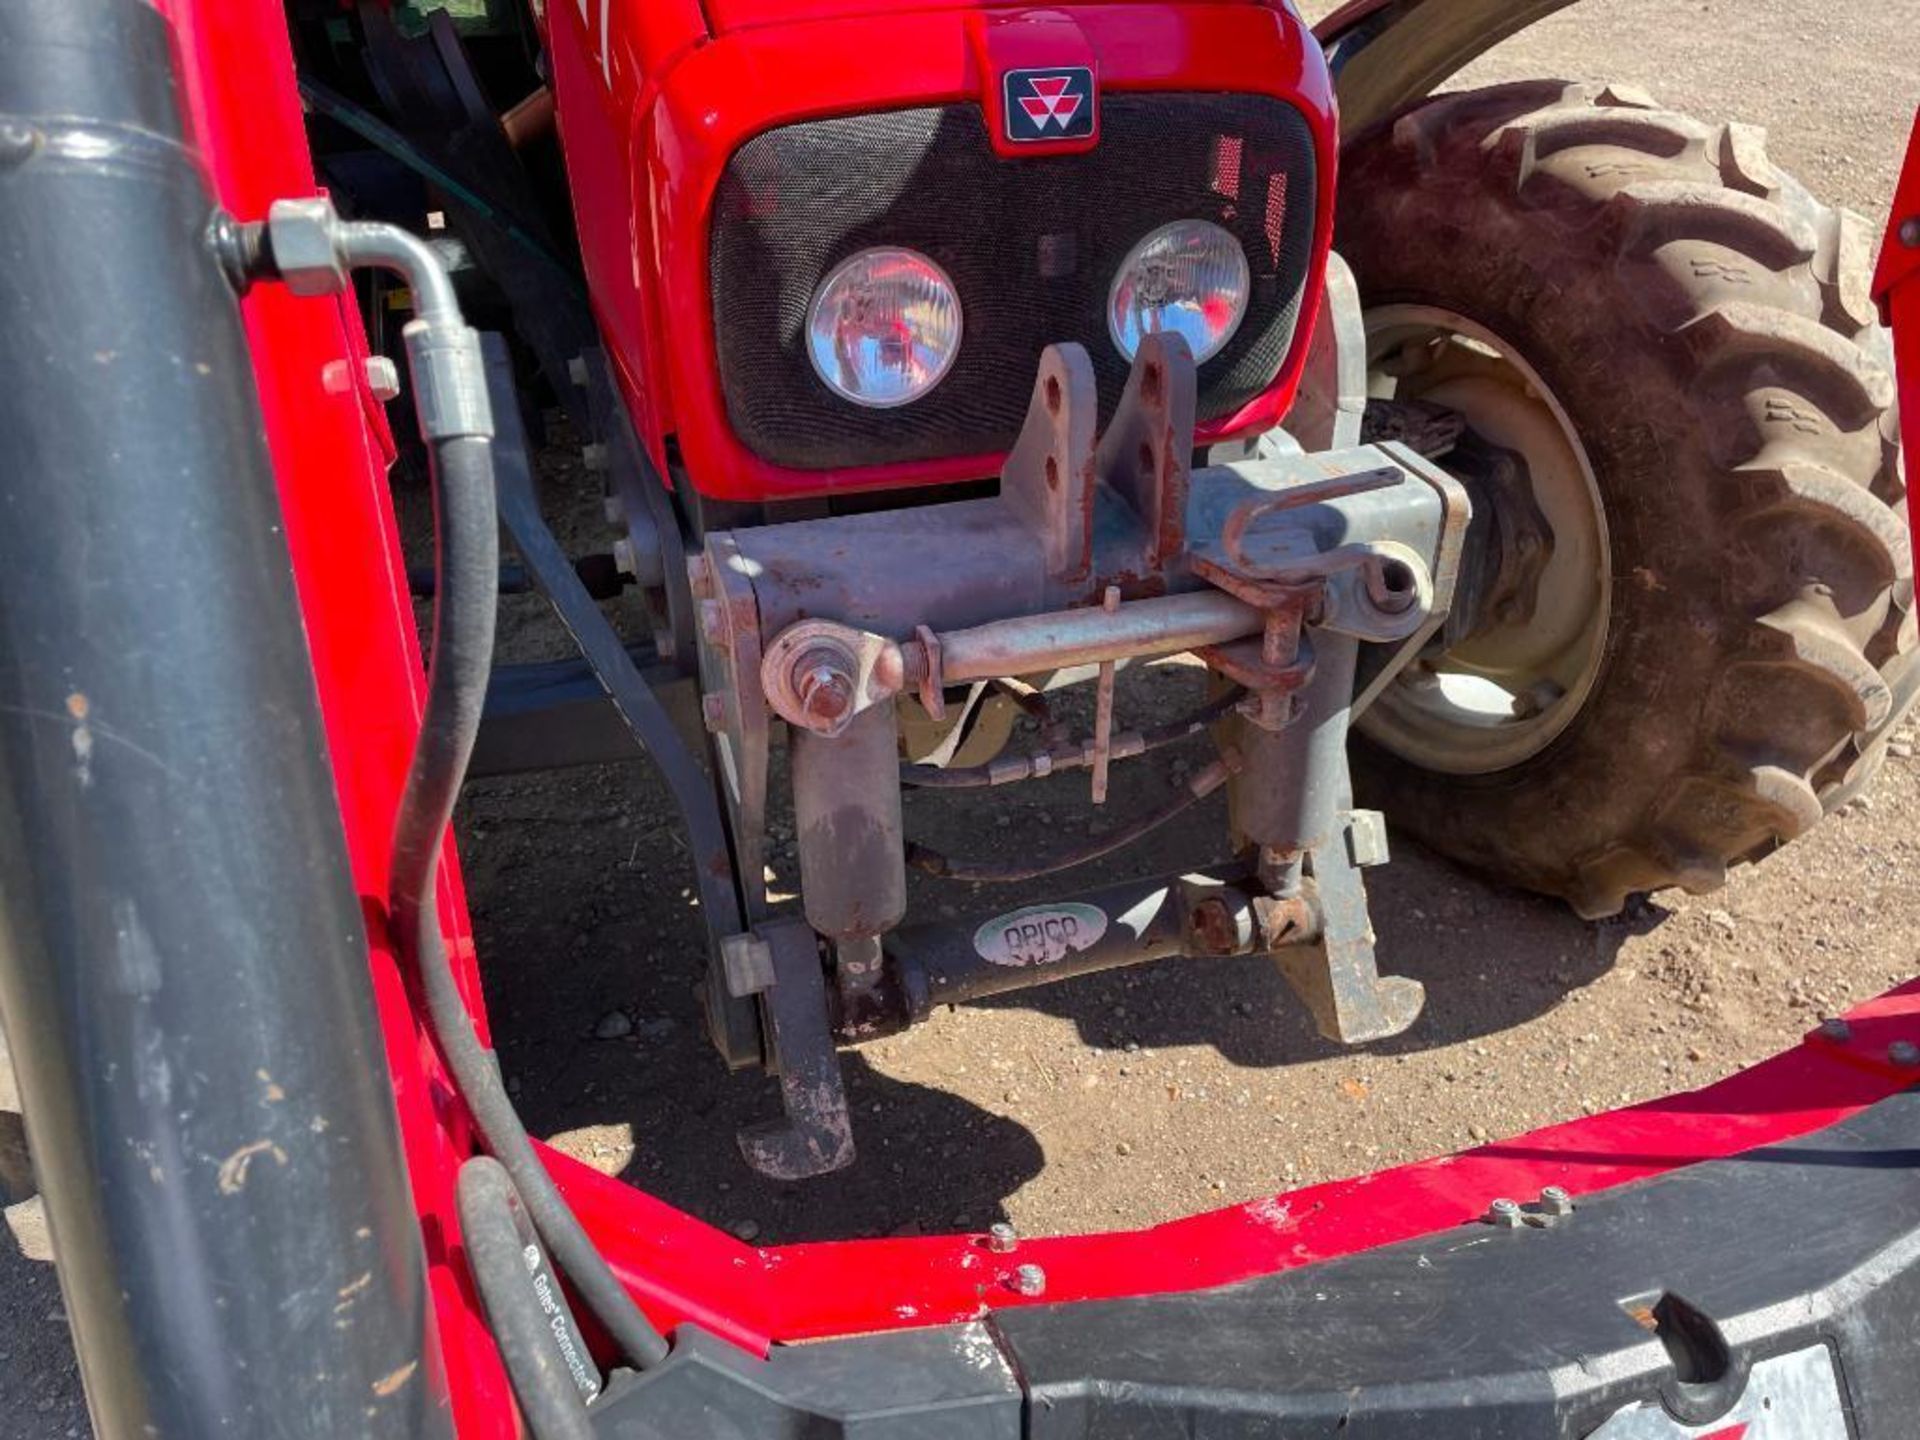 2010 Massey Ferguson 5455 4wd 40kph tractor with Massey Ferguson 945 front loader and pallet tines, - Image 15 of 19